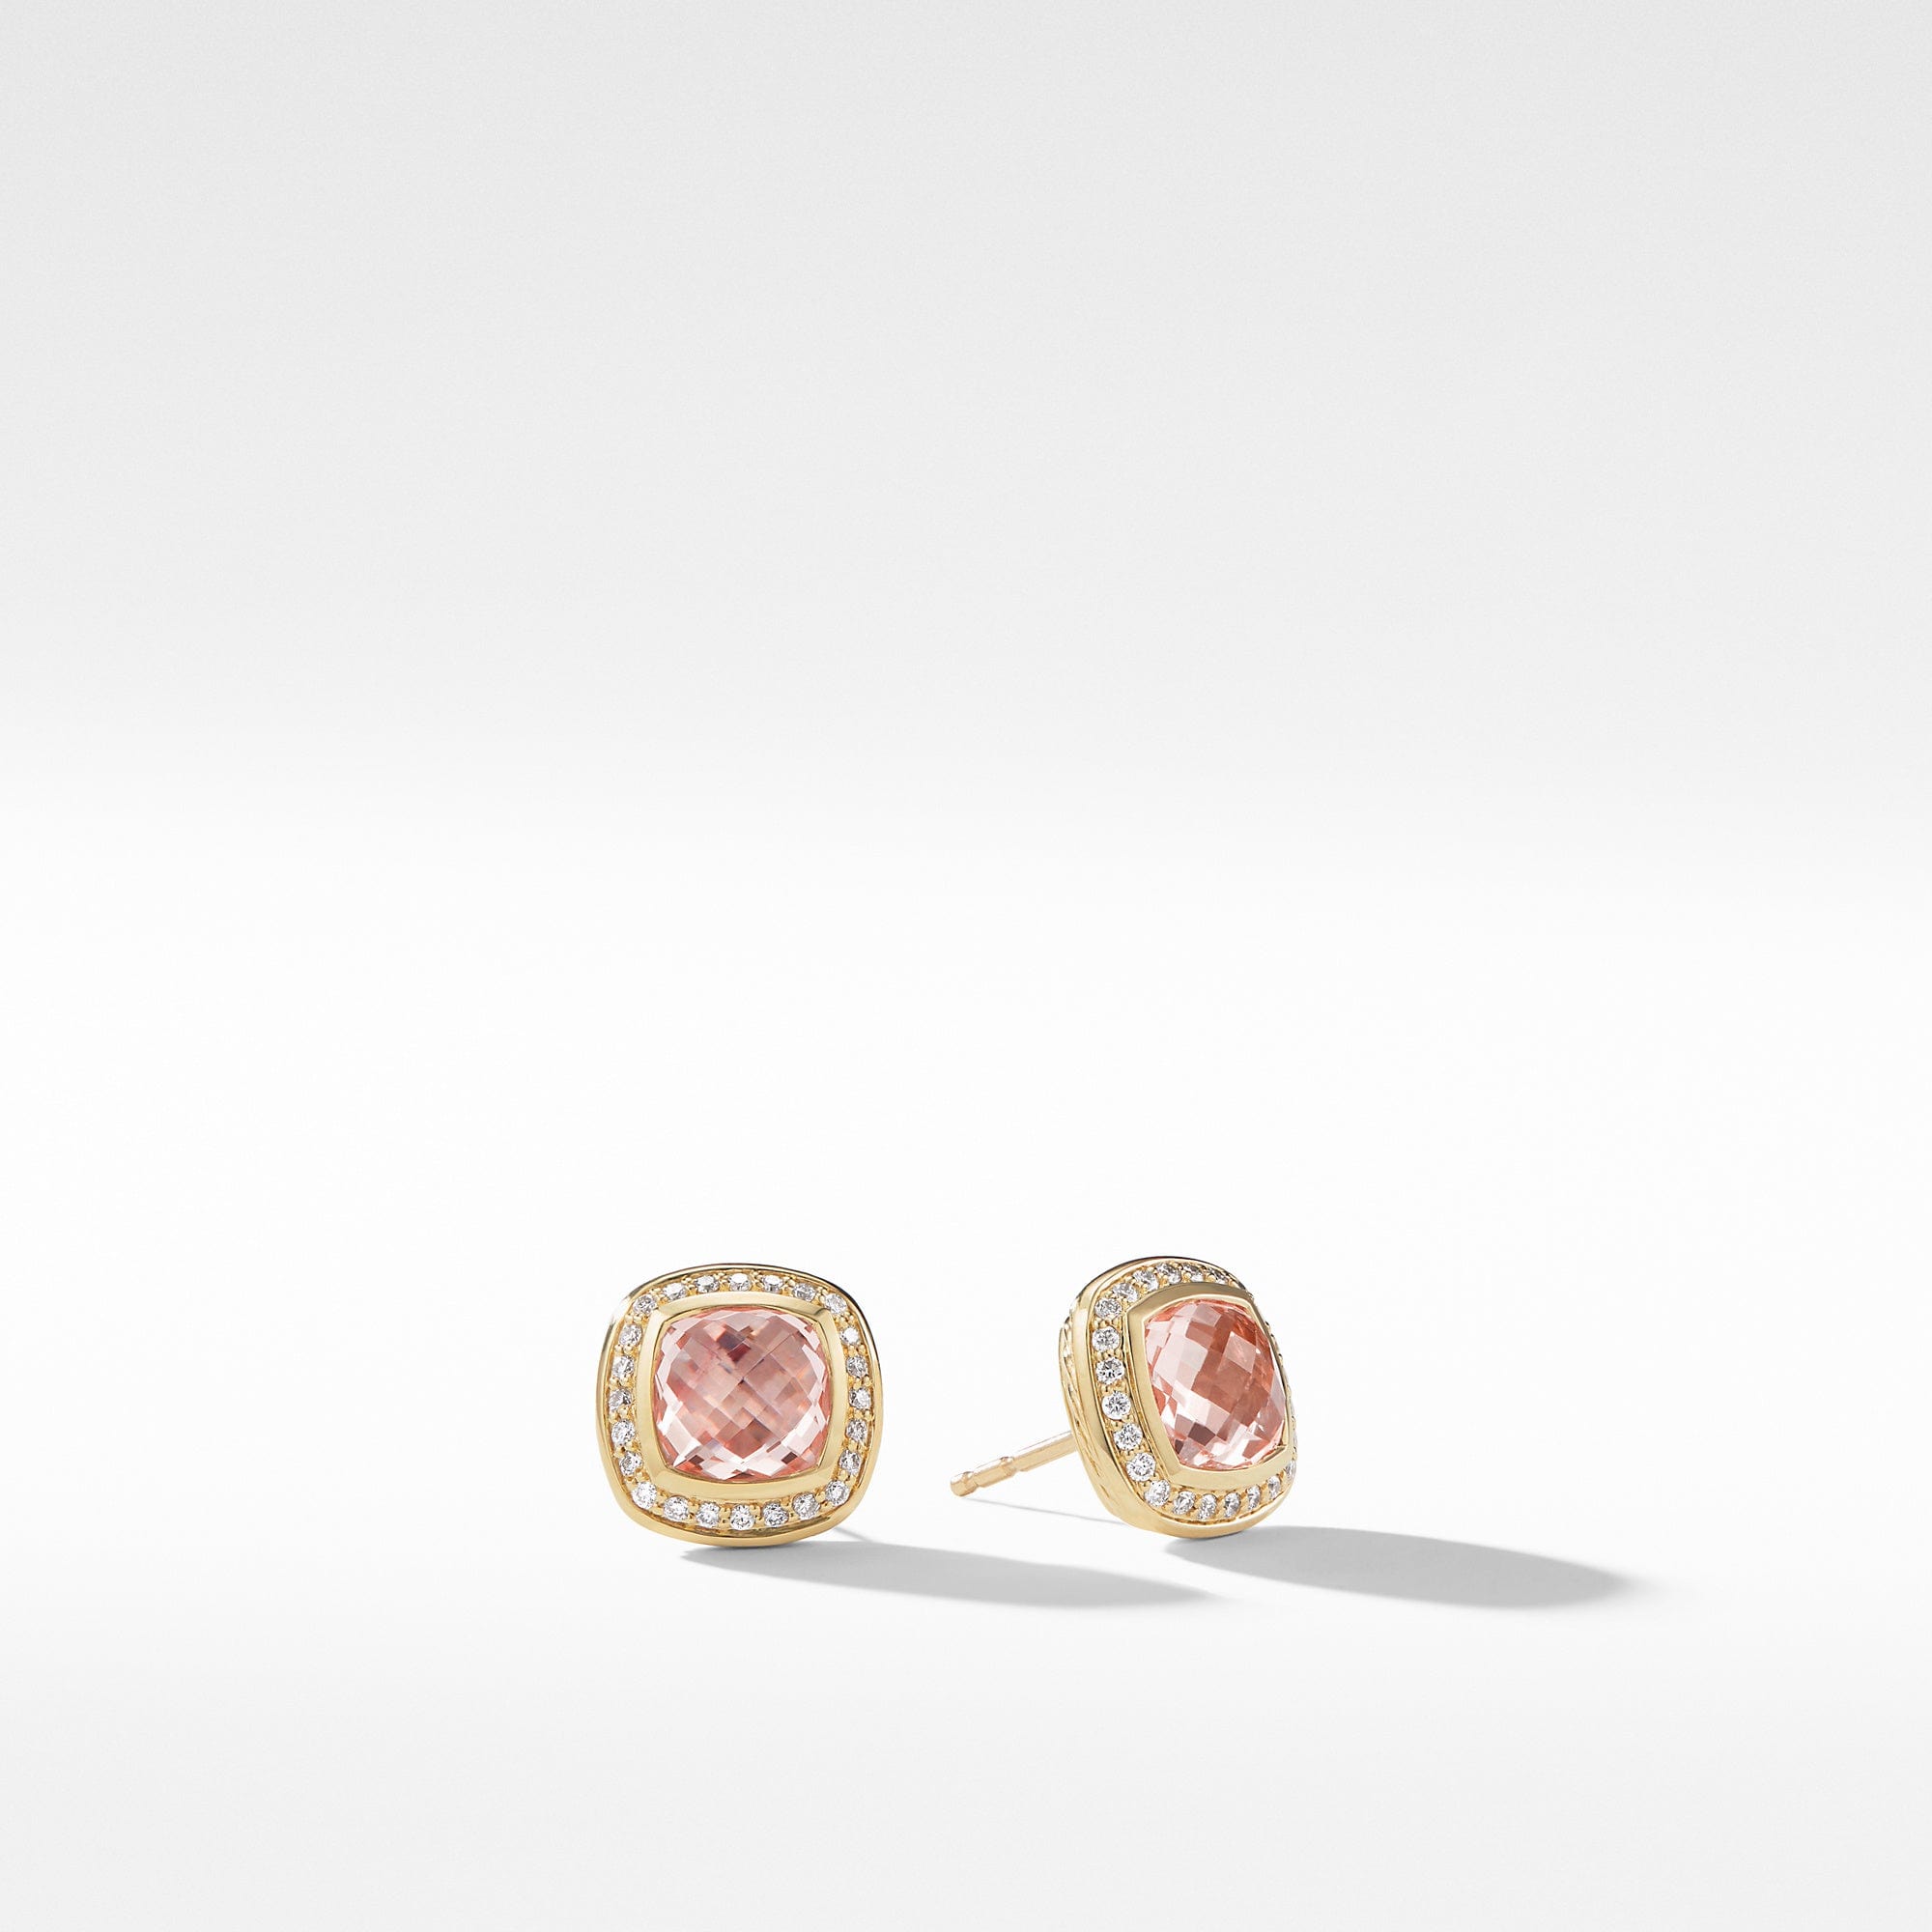 Albion Earrings with Morganite and Diamonds in 18K Gold, 7mm, Long's Jewelers